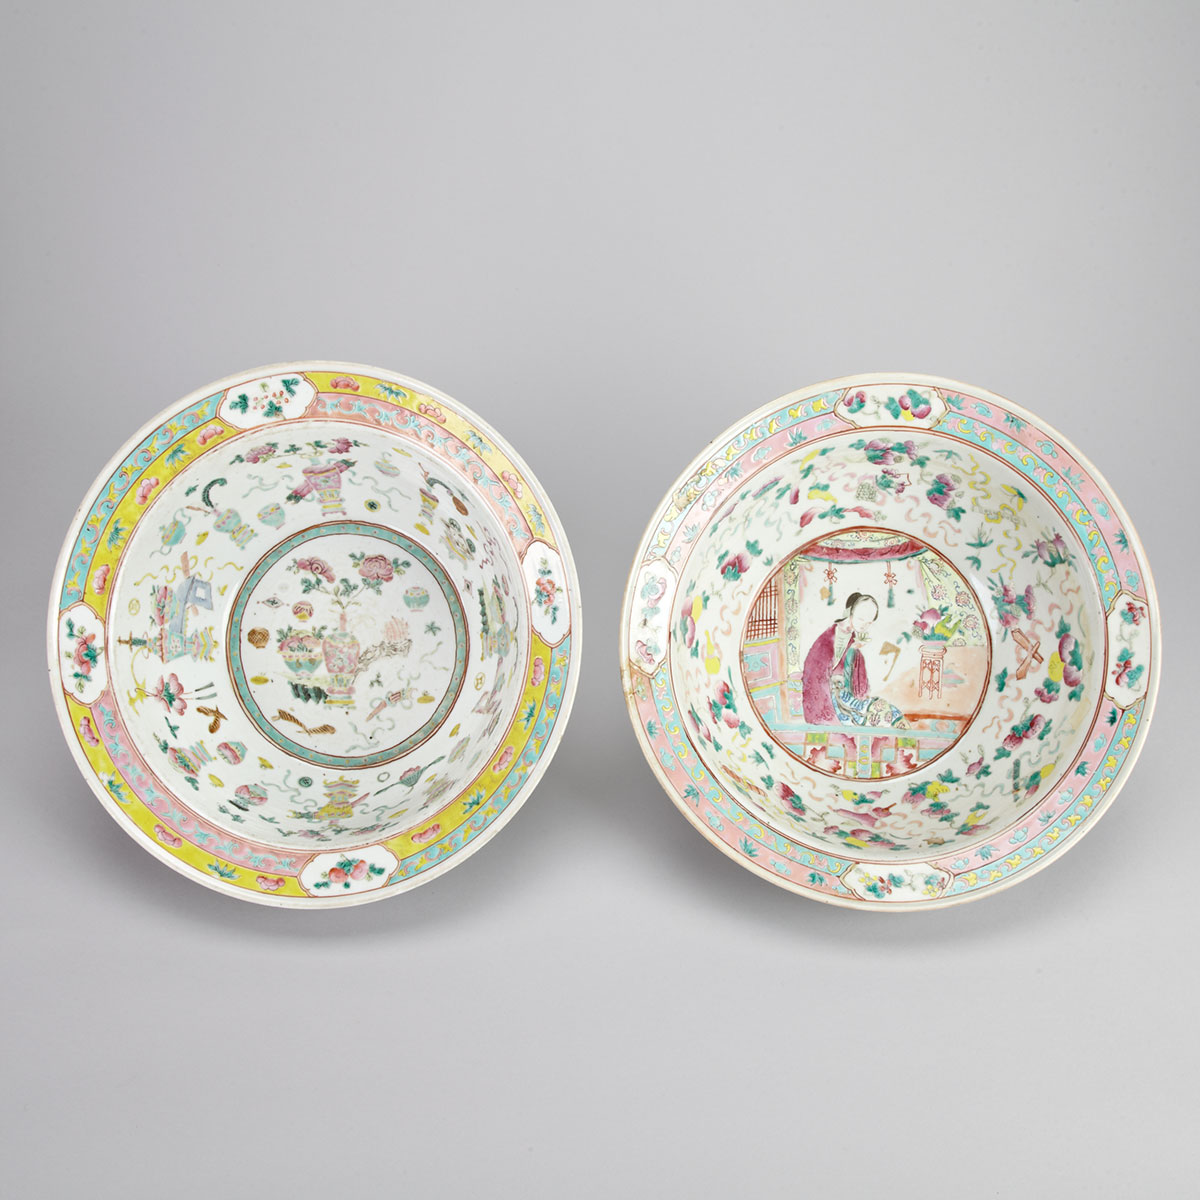 Pair of Large Famille Rose Basins, Late Qing Dynasty